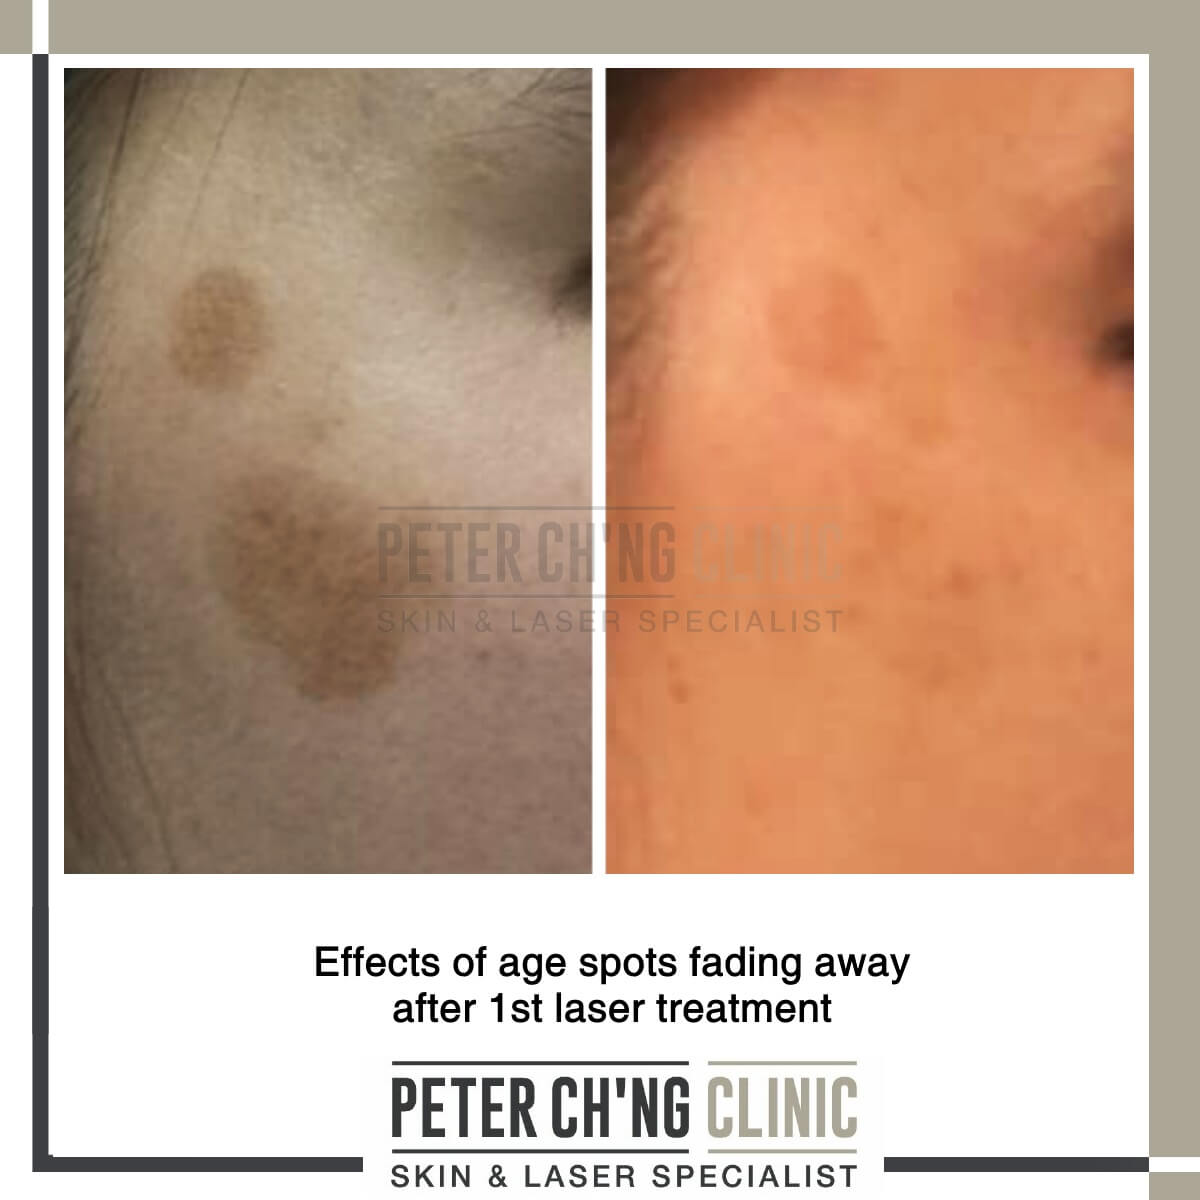 Laser treatment for age spots